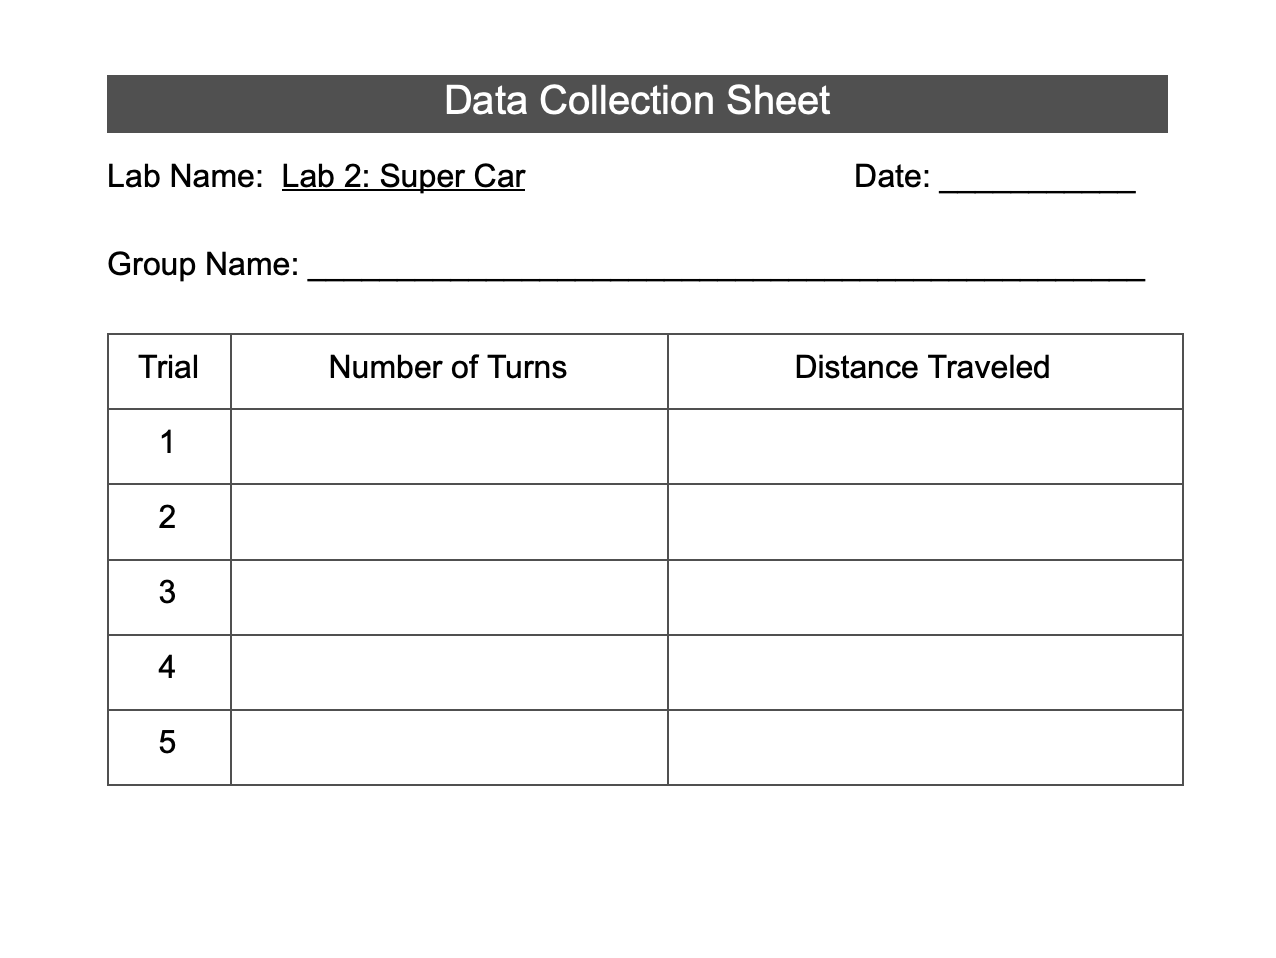 Data Collection Sheet